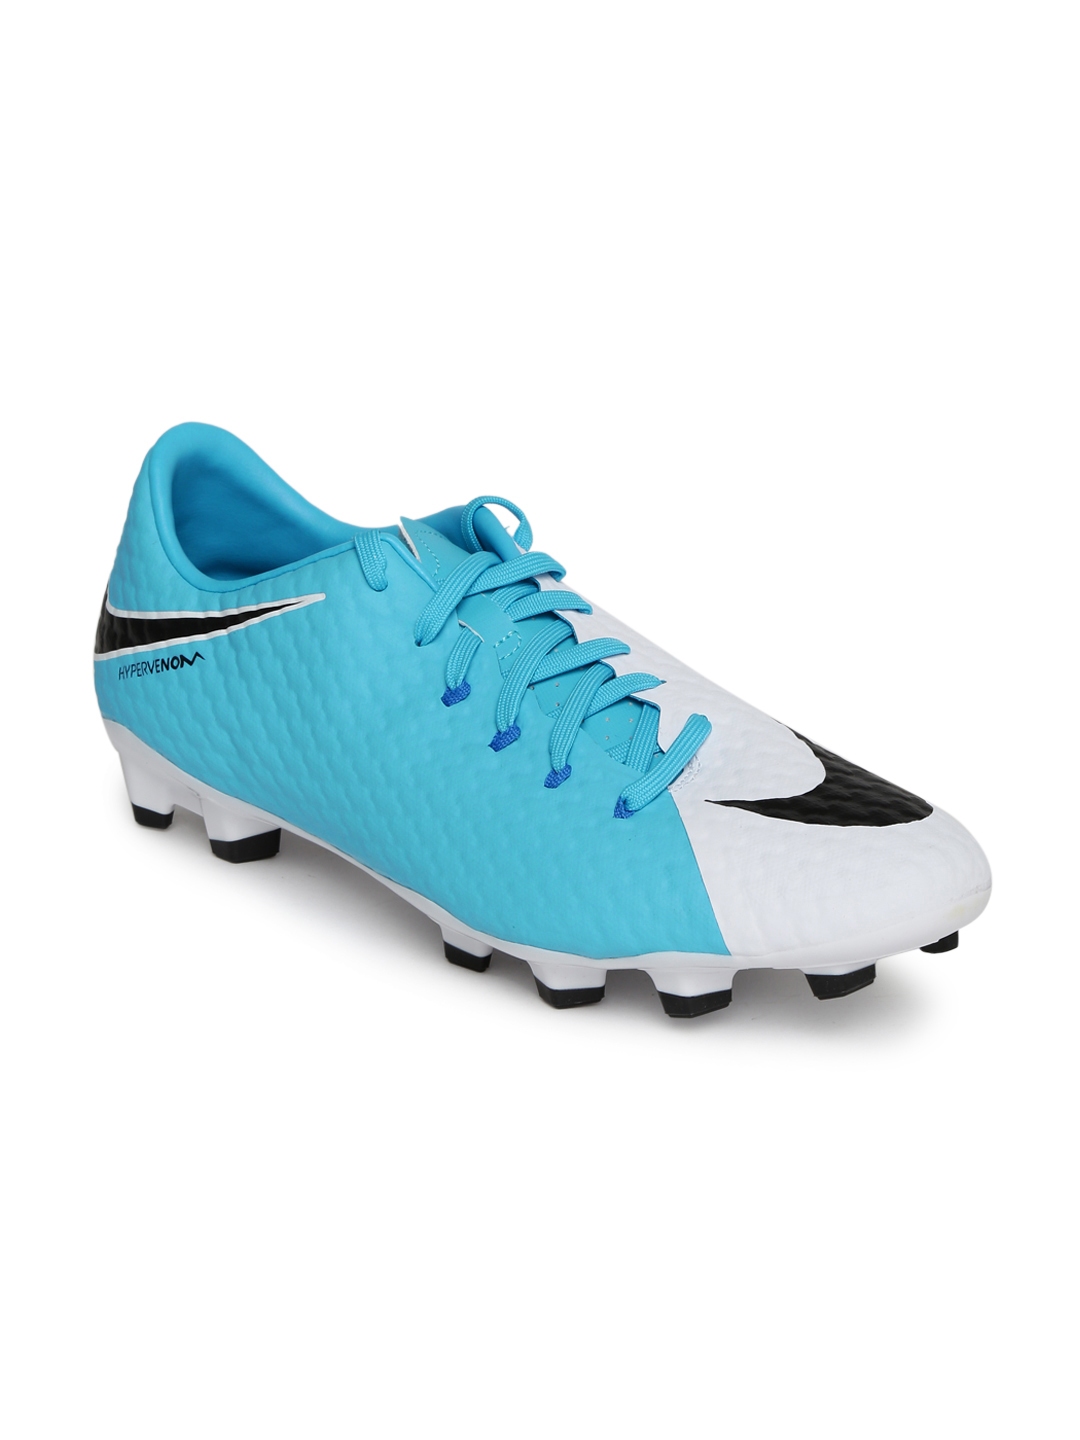 nike football boots blue and white